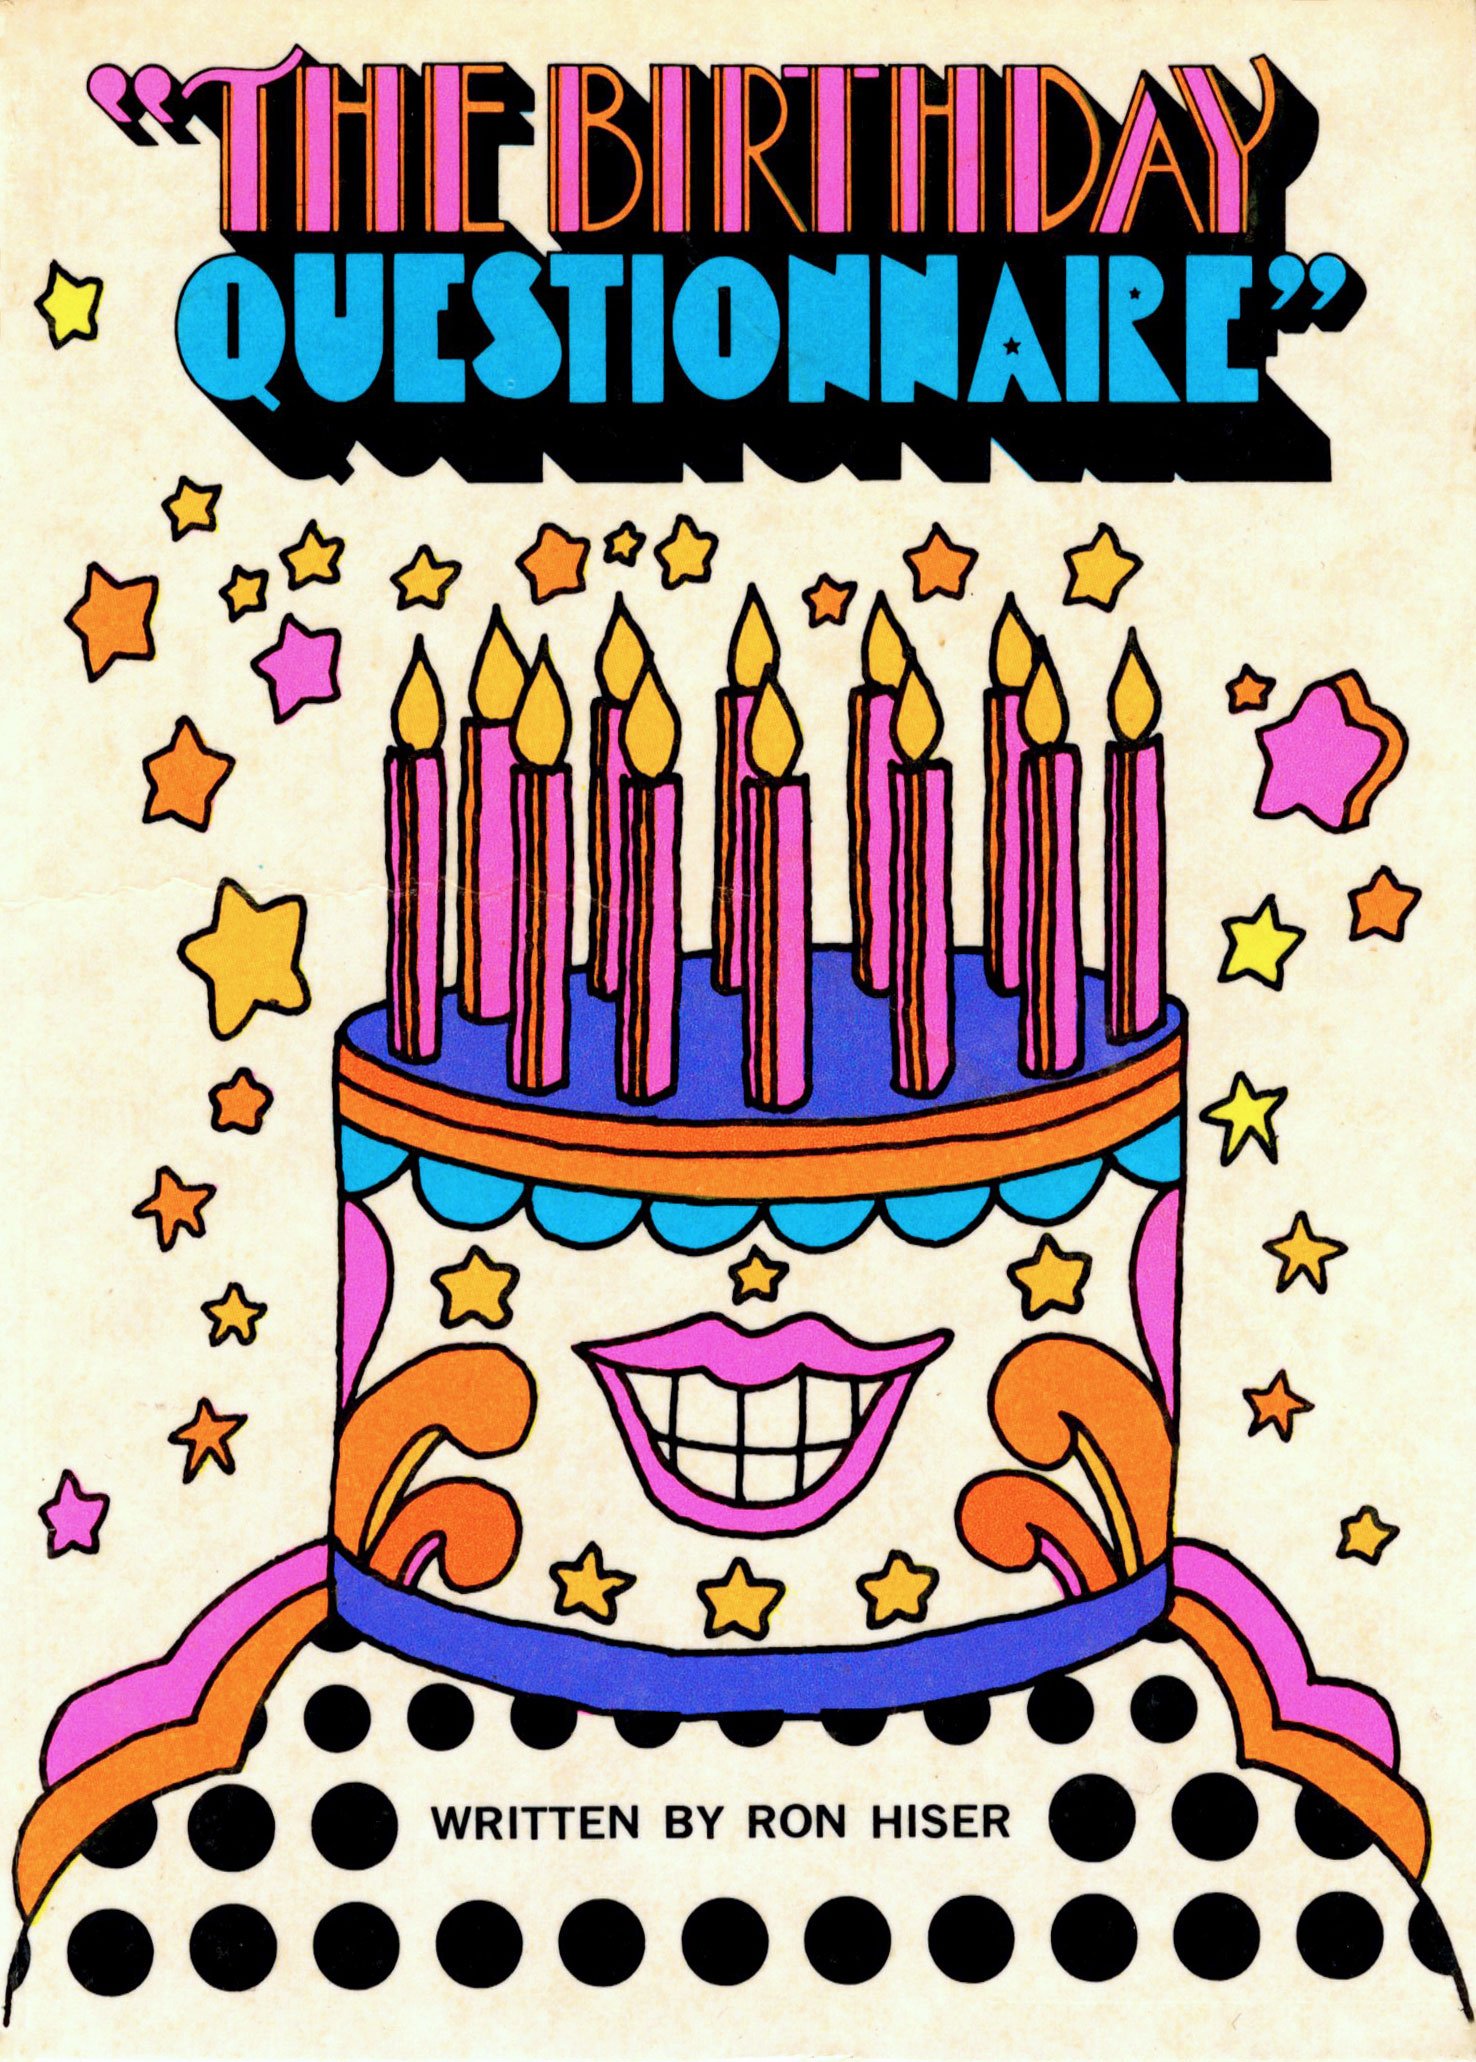 THE BIRTHDAY QUESTIONNAIRE